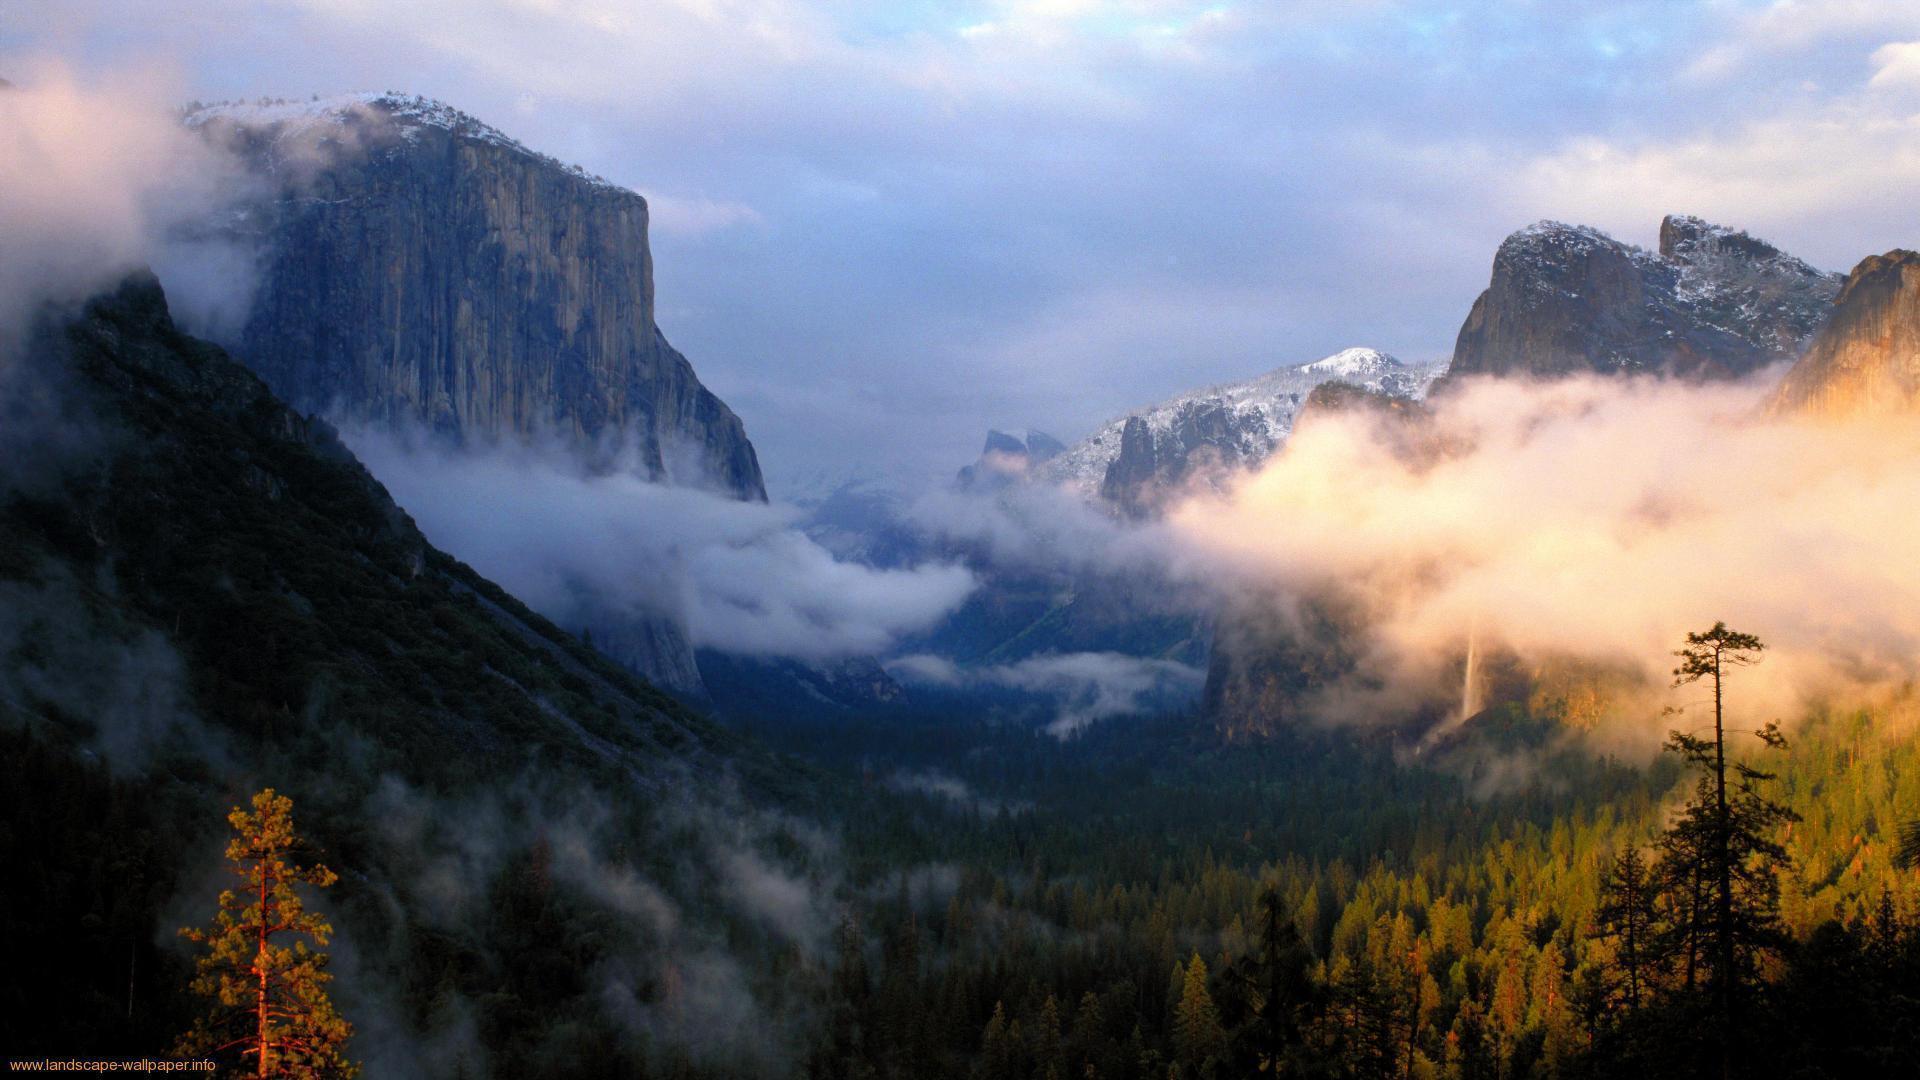 Check this out! our new Yosemite wallpaper